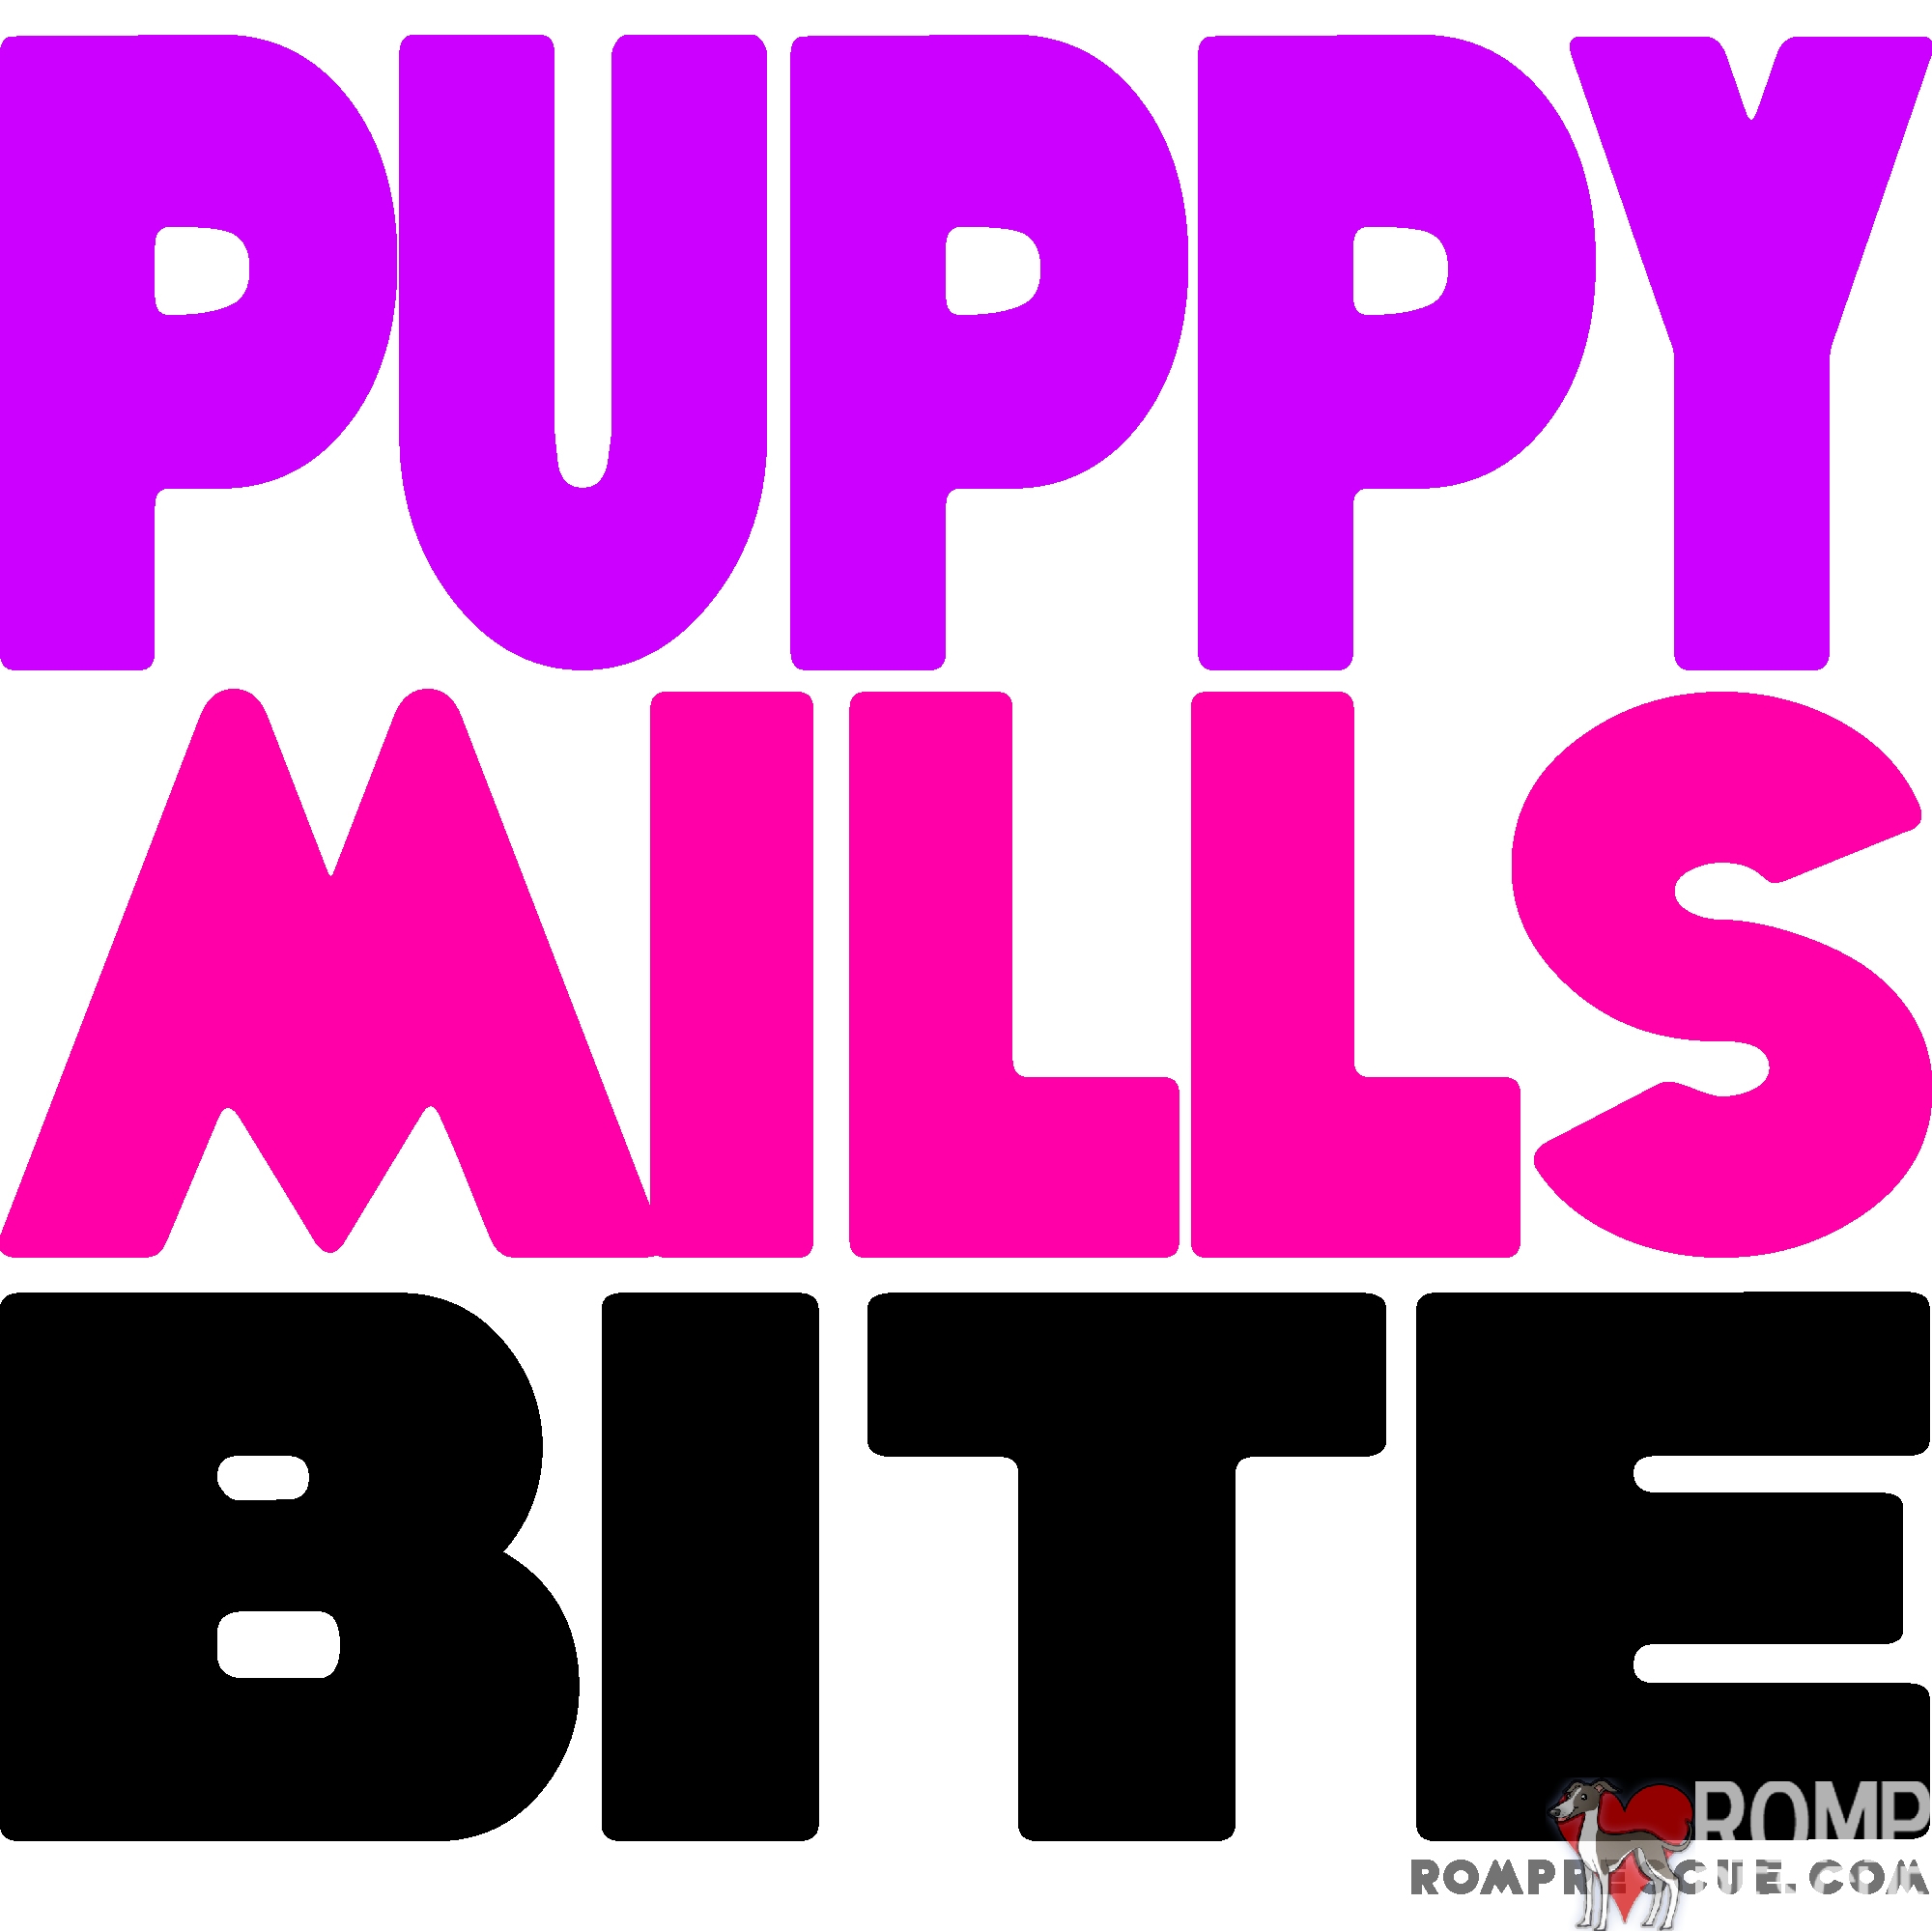 puppy mills bite, puppy mills, no, stop, dont, adopt, rescue, help, shirt, design, colorful, trendy, cool, neon